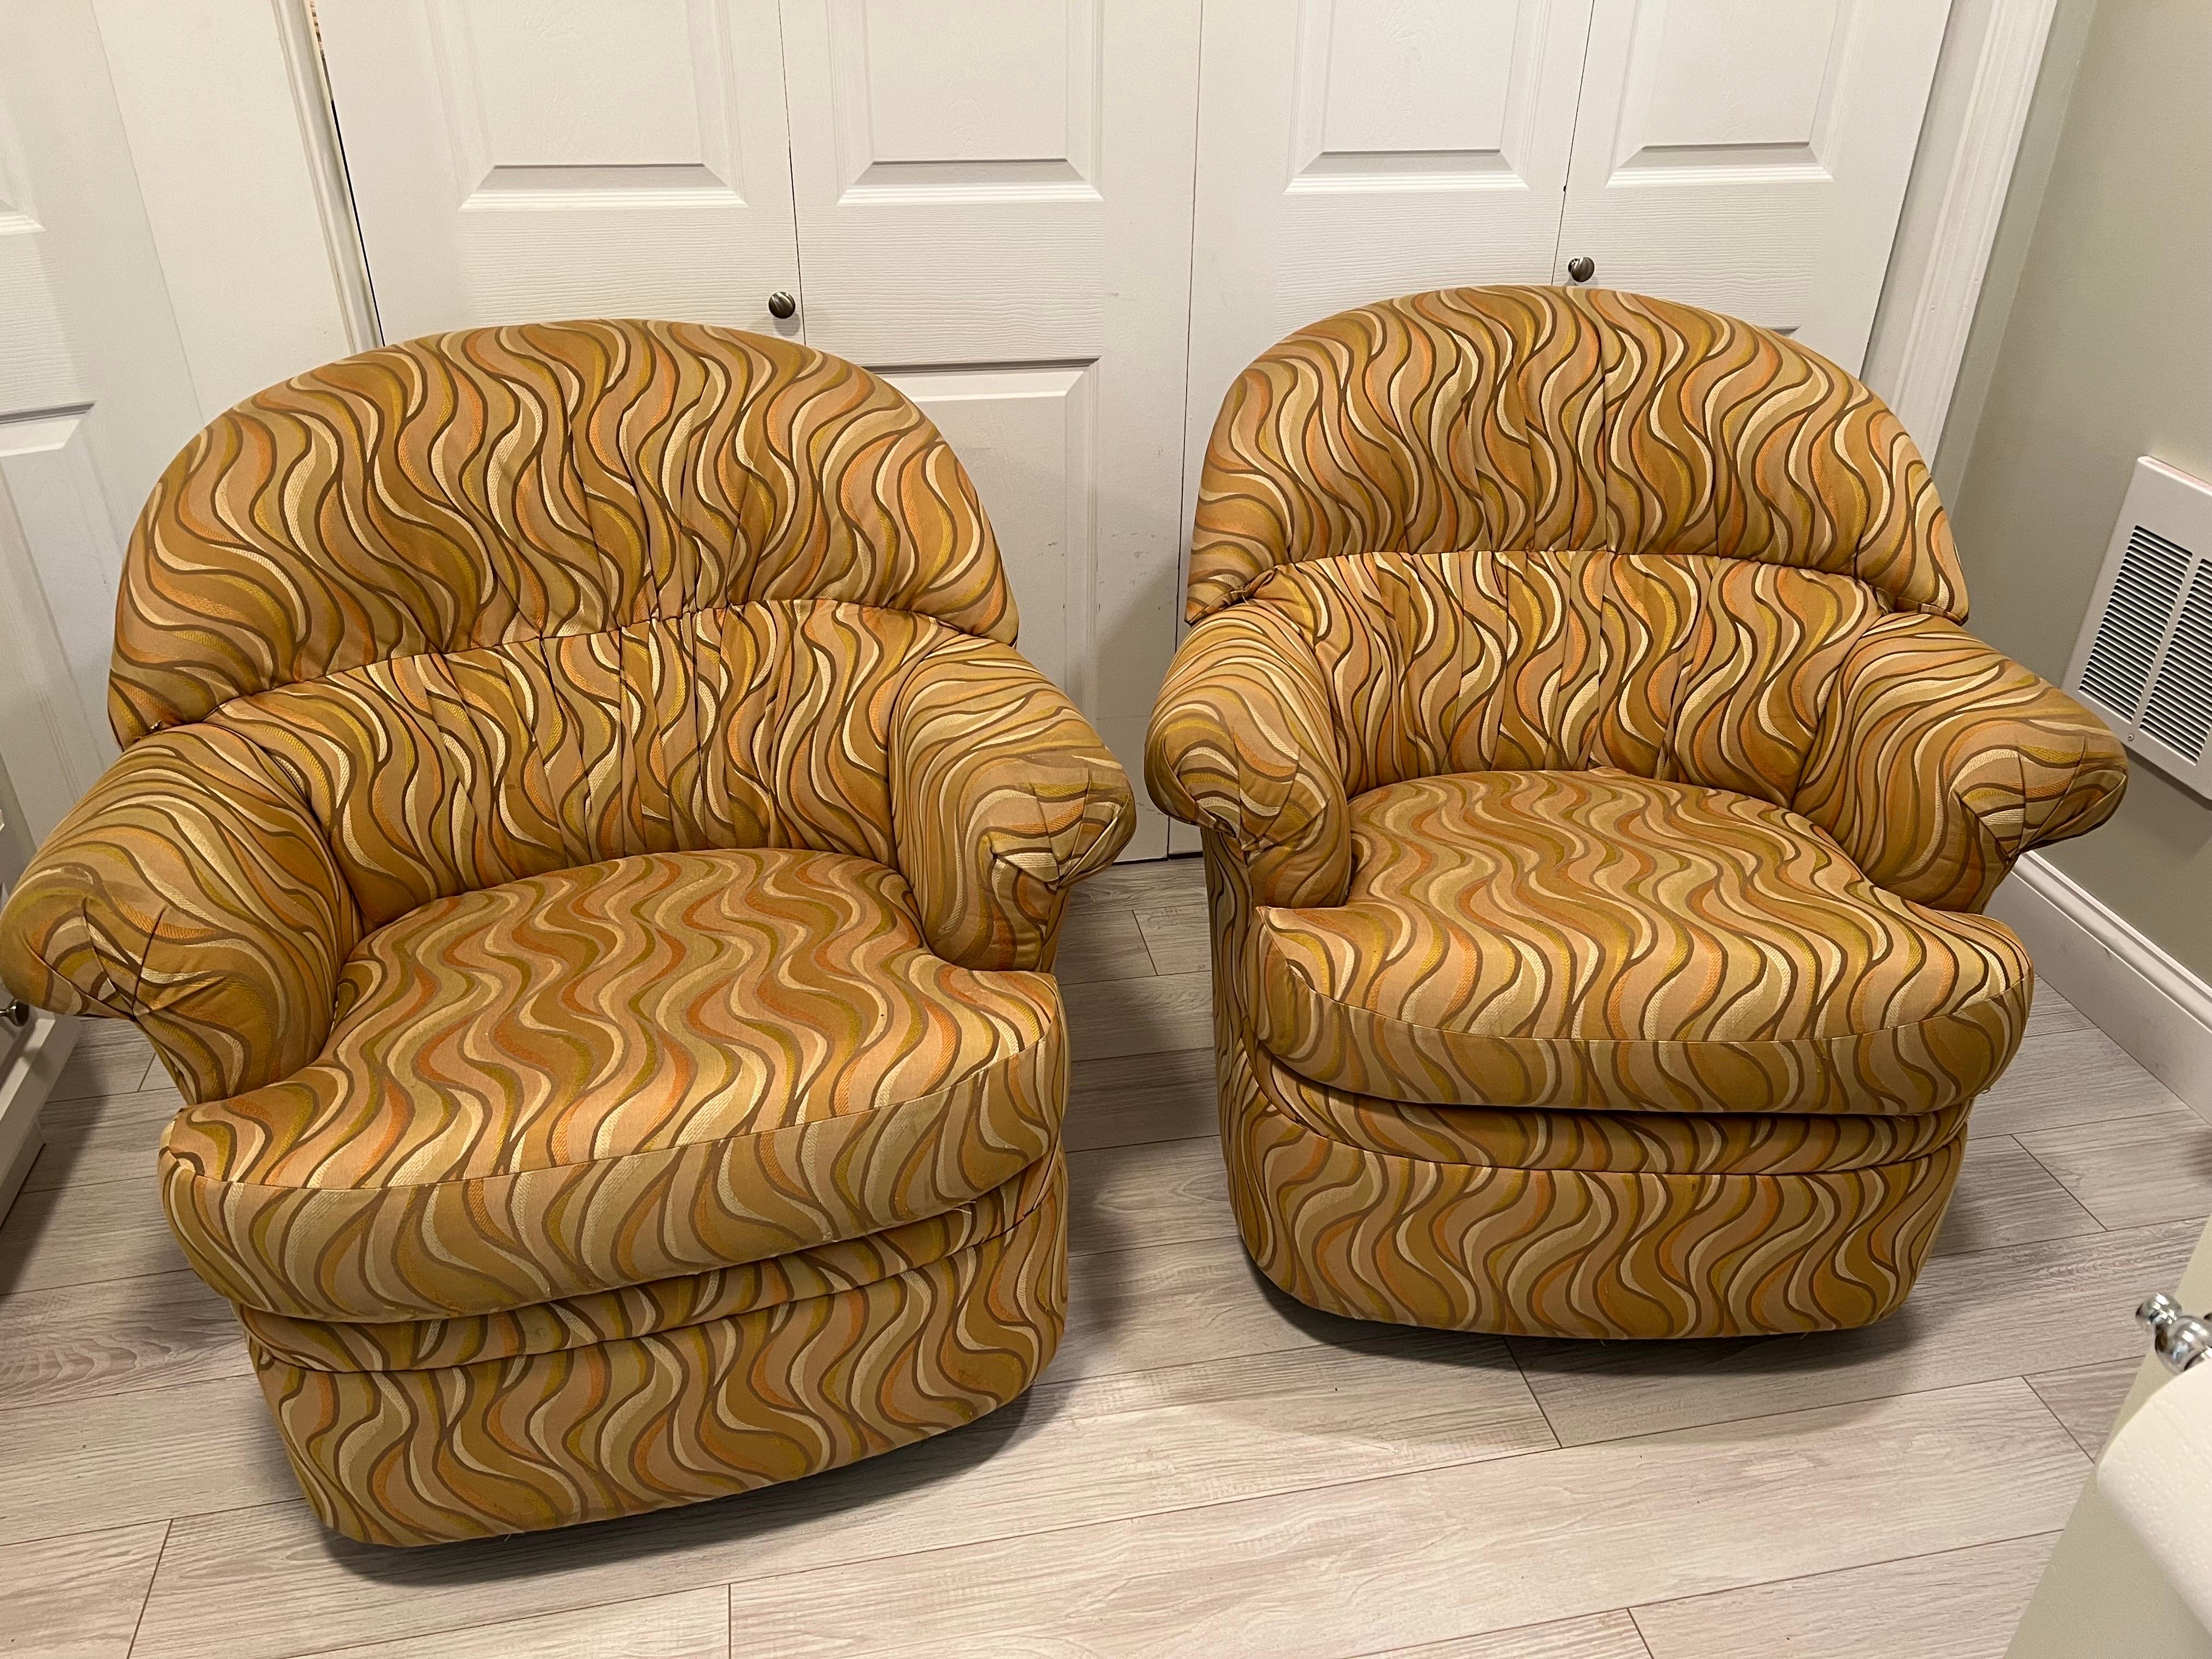 Pair of 1980's Post Modern swivel club chairs. They both swivel and Rock. Super comfortable with nice supportive back. Wear consistent with age and use, some light stains to fabric. Use as is or recover in desired fabric
Overall Measurements: Total